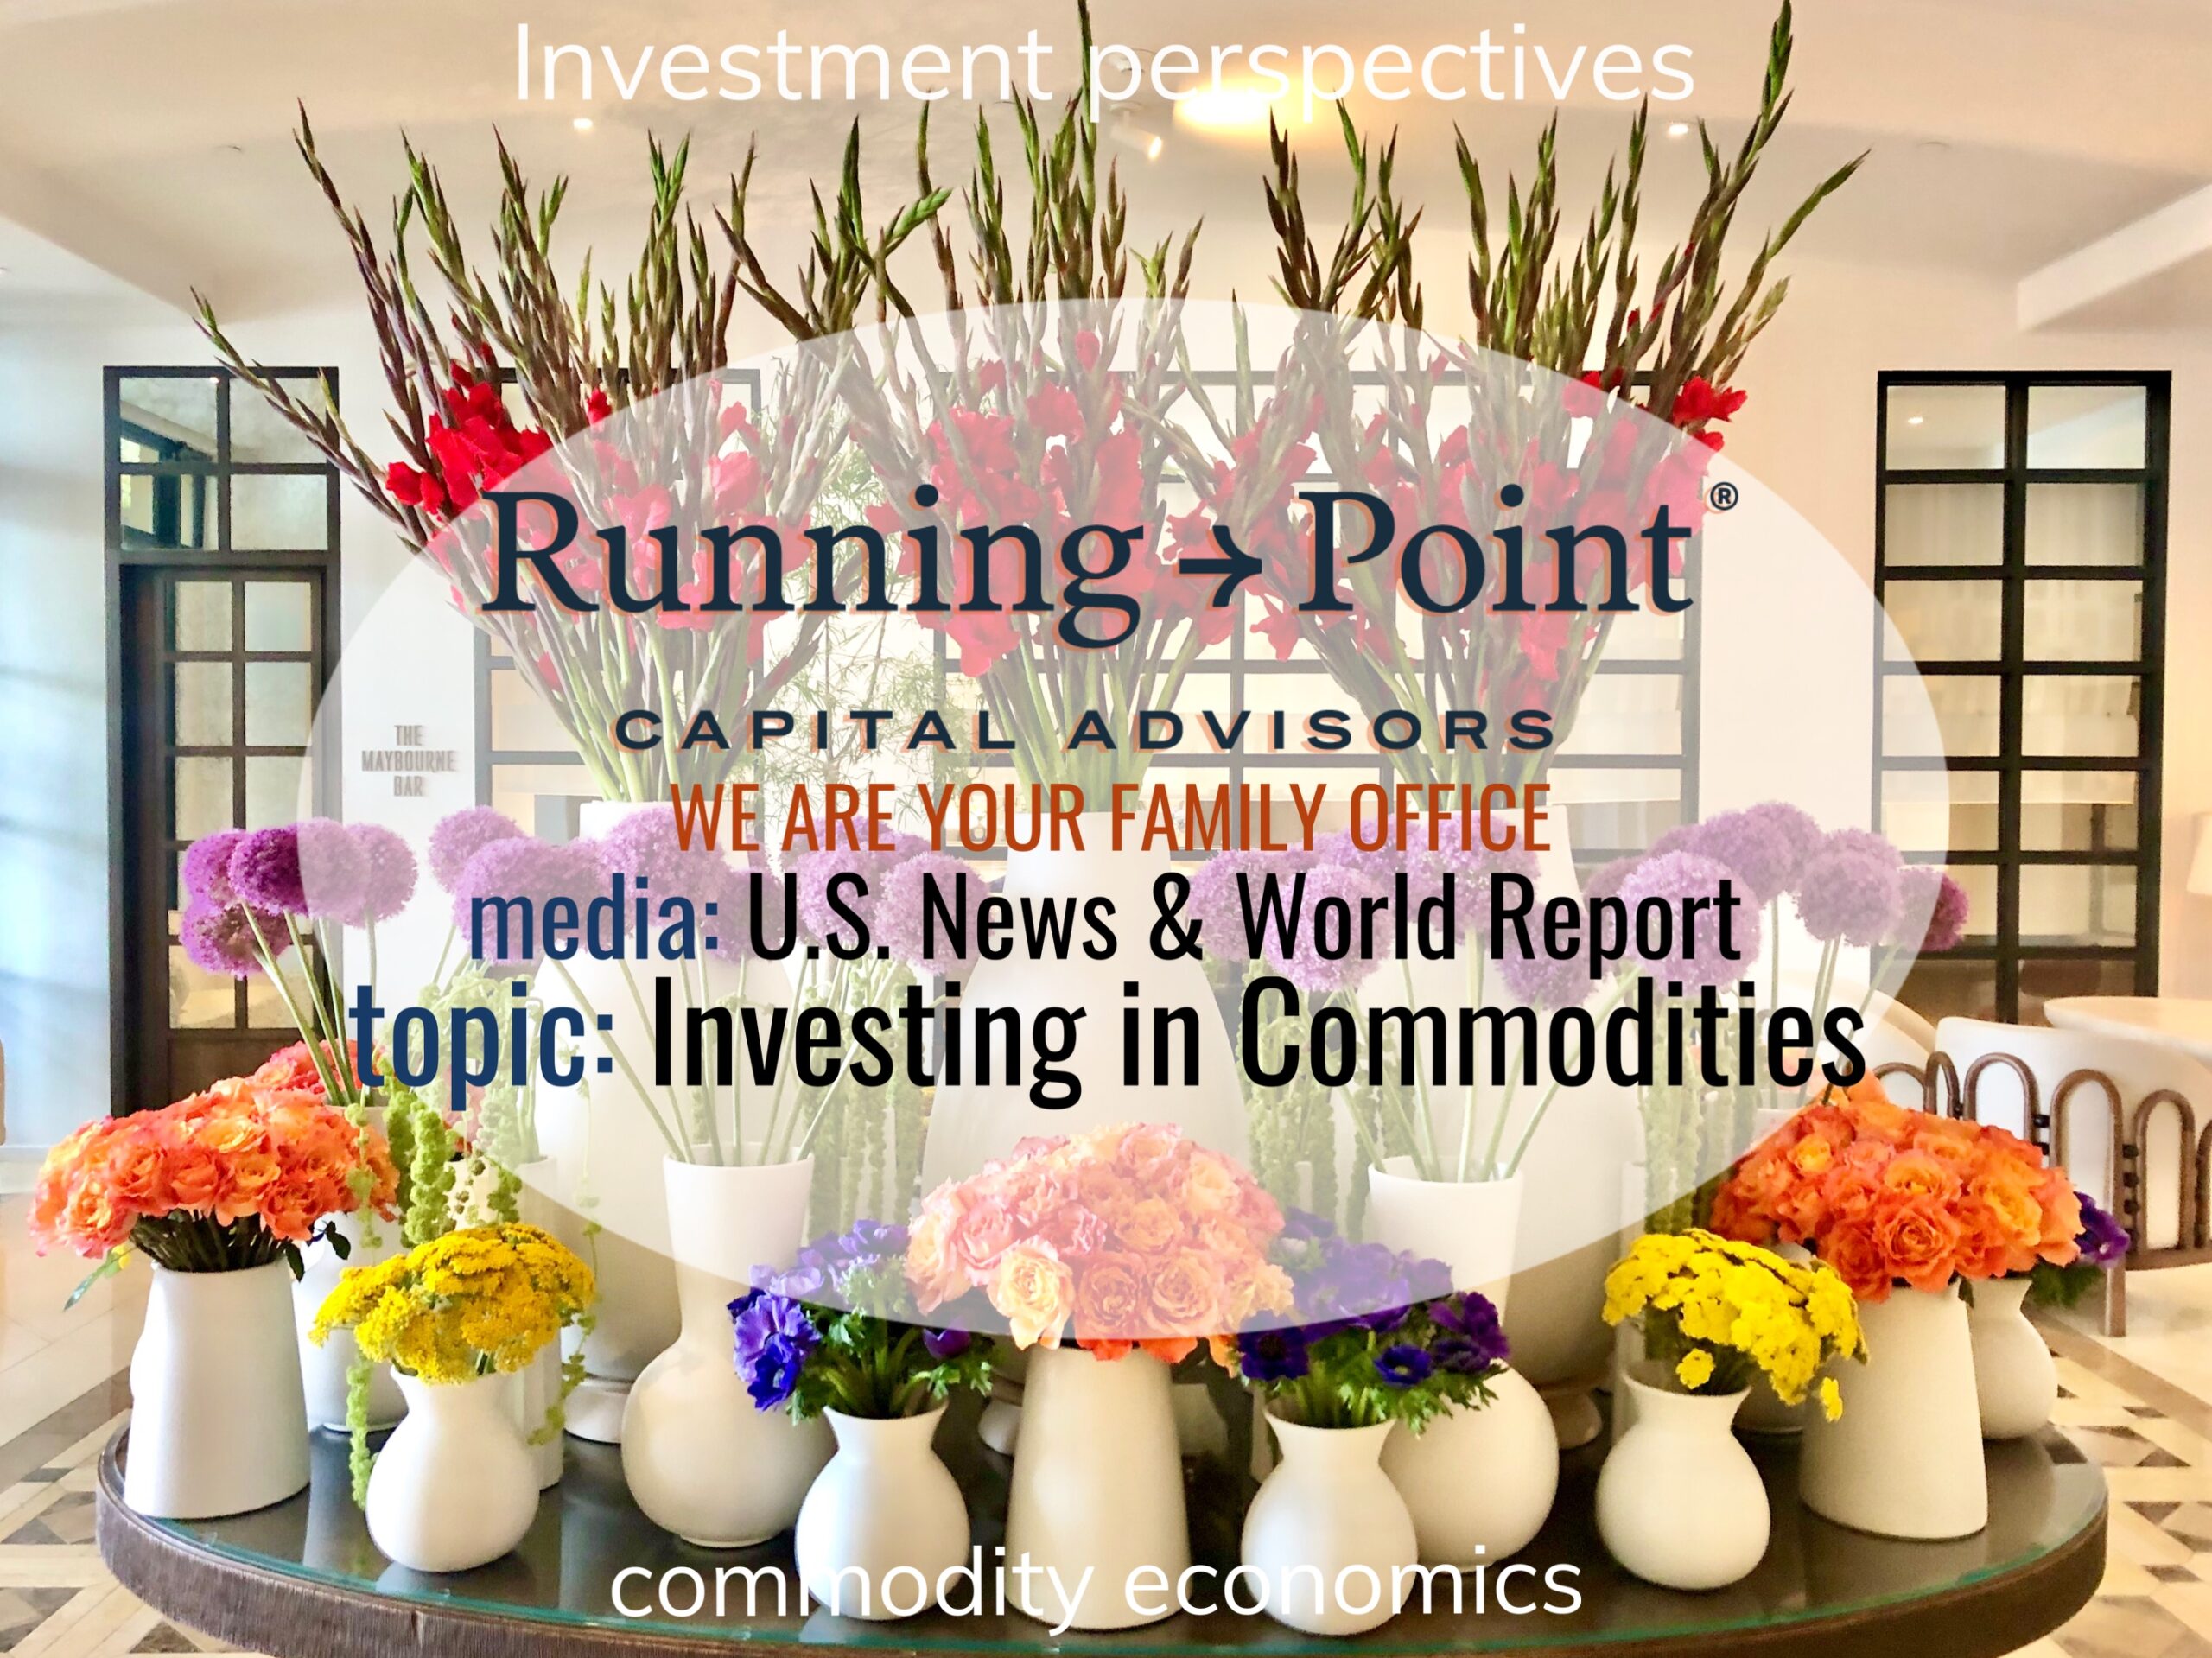 U.S. News & World Report: Investing in Commodities